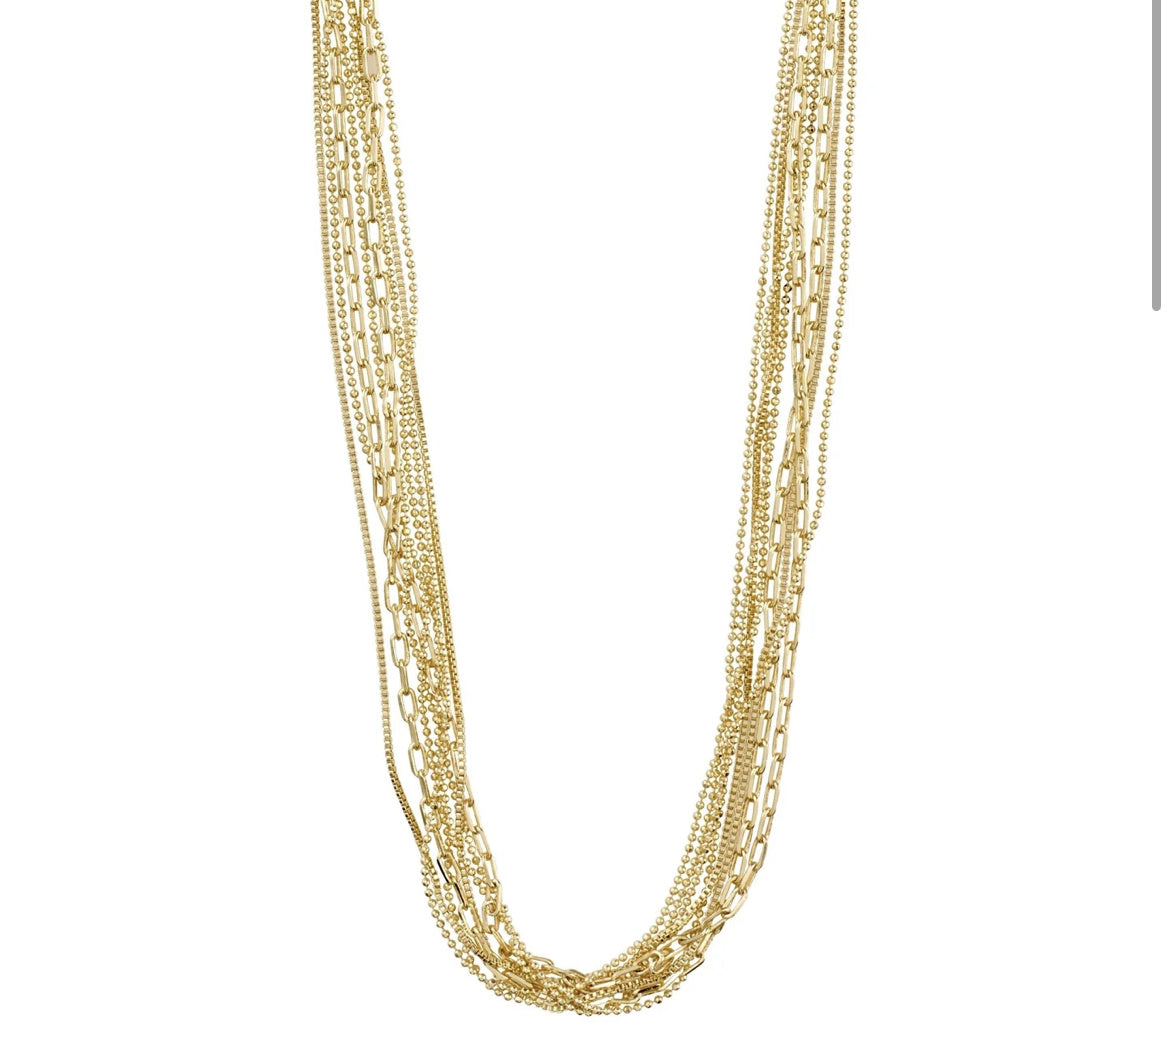 Pilgrim Lilly Chain necklace